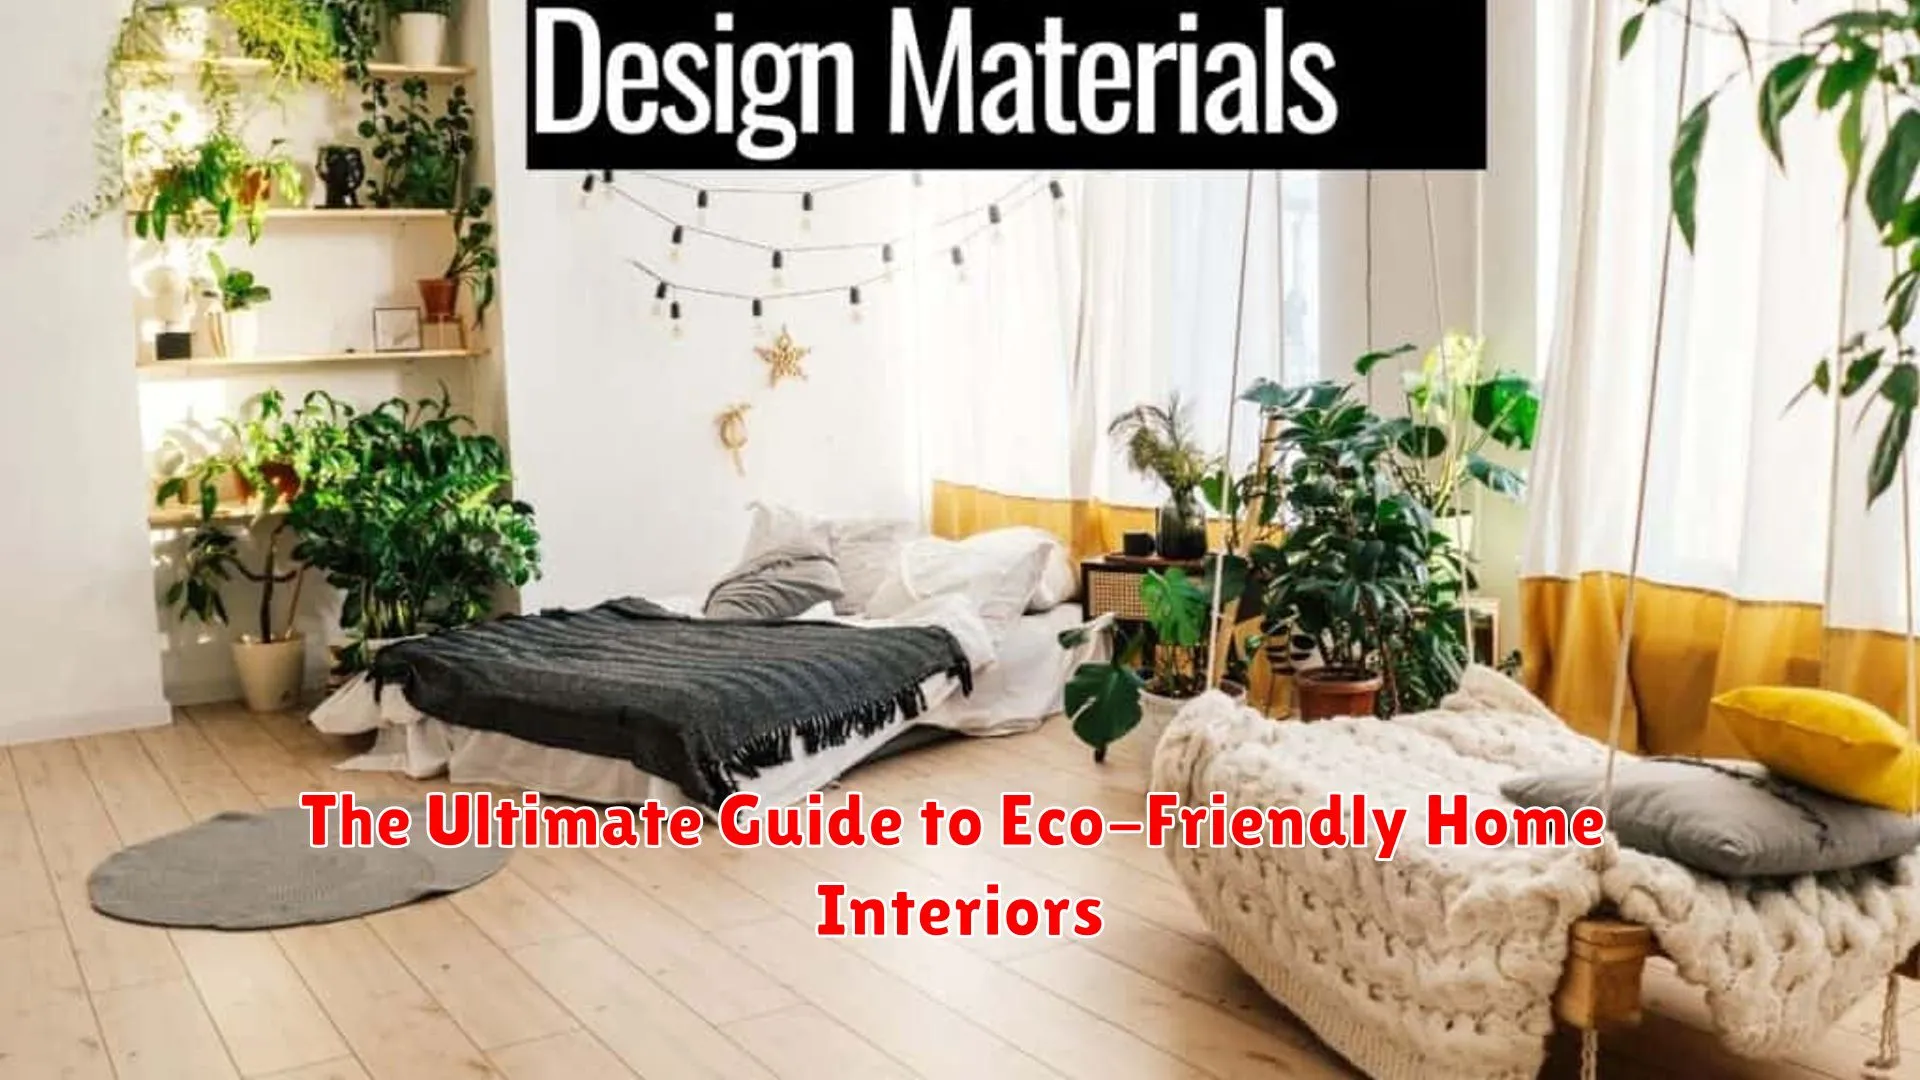 The Ultimate Guide to Eco-Friendly Home Interiors